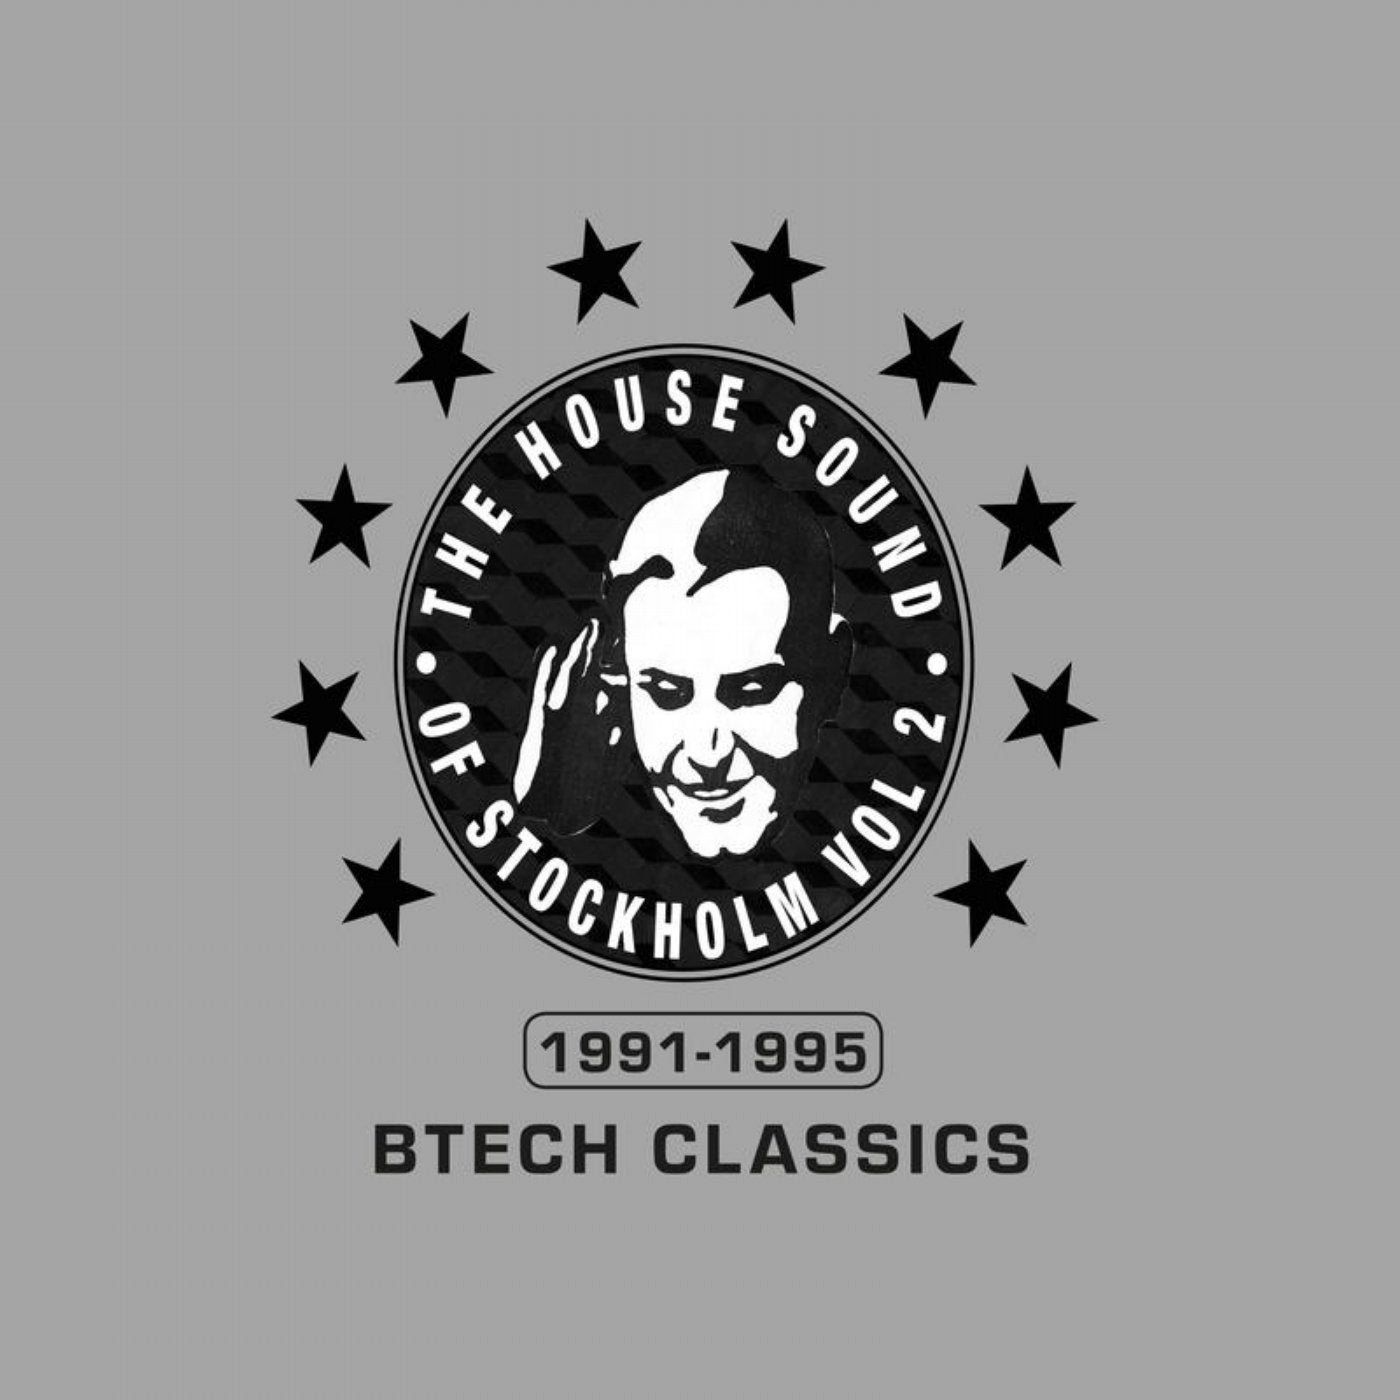 The House Sound of Stockholm Vol 2: Btech Classics 1991-1995